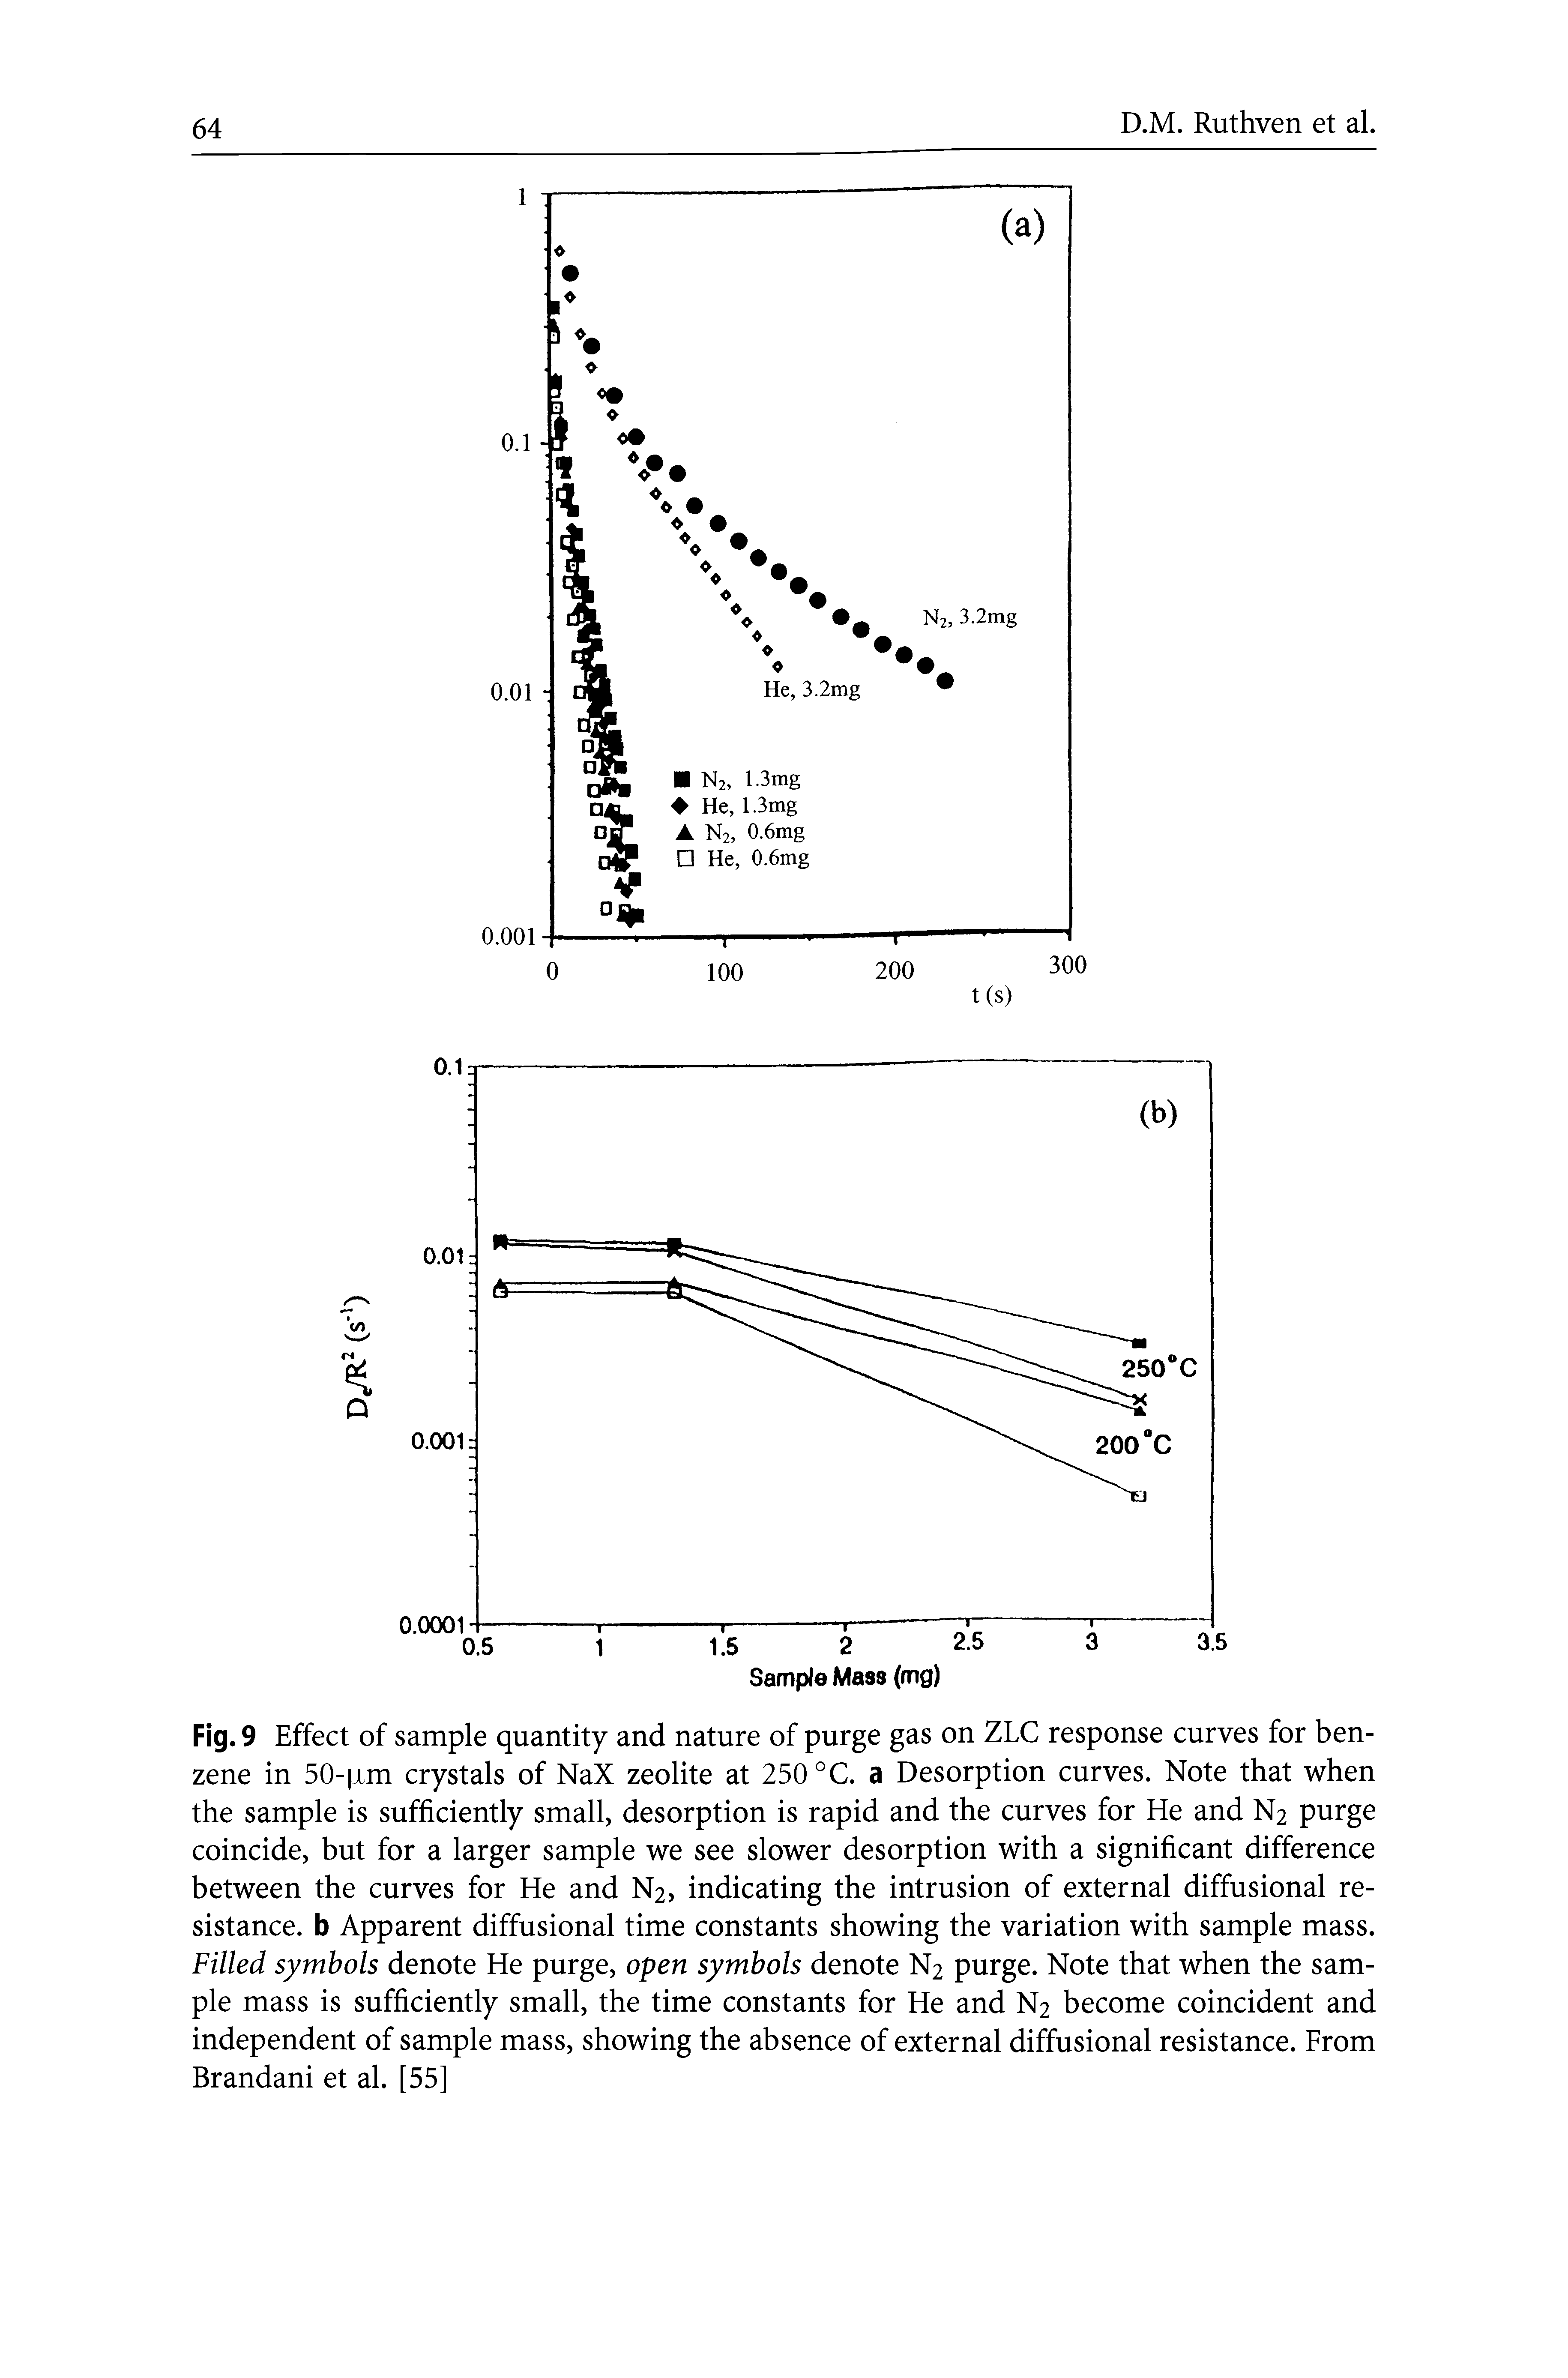 Fig. 9 Effect of sample quantity and nature of purge gas on ZLC response curves for benzene in 50- jim crystals of NaX zeolite at 250 °C. a Desorption curves. Note that when the sample is sufficiently small, desorption is rapid and the curves for He and N2 purge coincide, but for a larger sample we see slower desorption with a significant difference between the curves for He and N2, indicating the intrusion of external diffusional resistance. b Apparent diffusional time constants showing the variation with sample mass. Filled symbols denote He purge, open symbols denote N2 purge. Note that when the sample mass is sufficiently small, the time constants for He and N2 become coincident and independent of sample mass, showing the absence of external diffusional resistance. From Brandani et al. [55]...